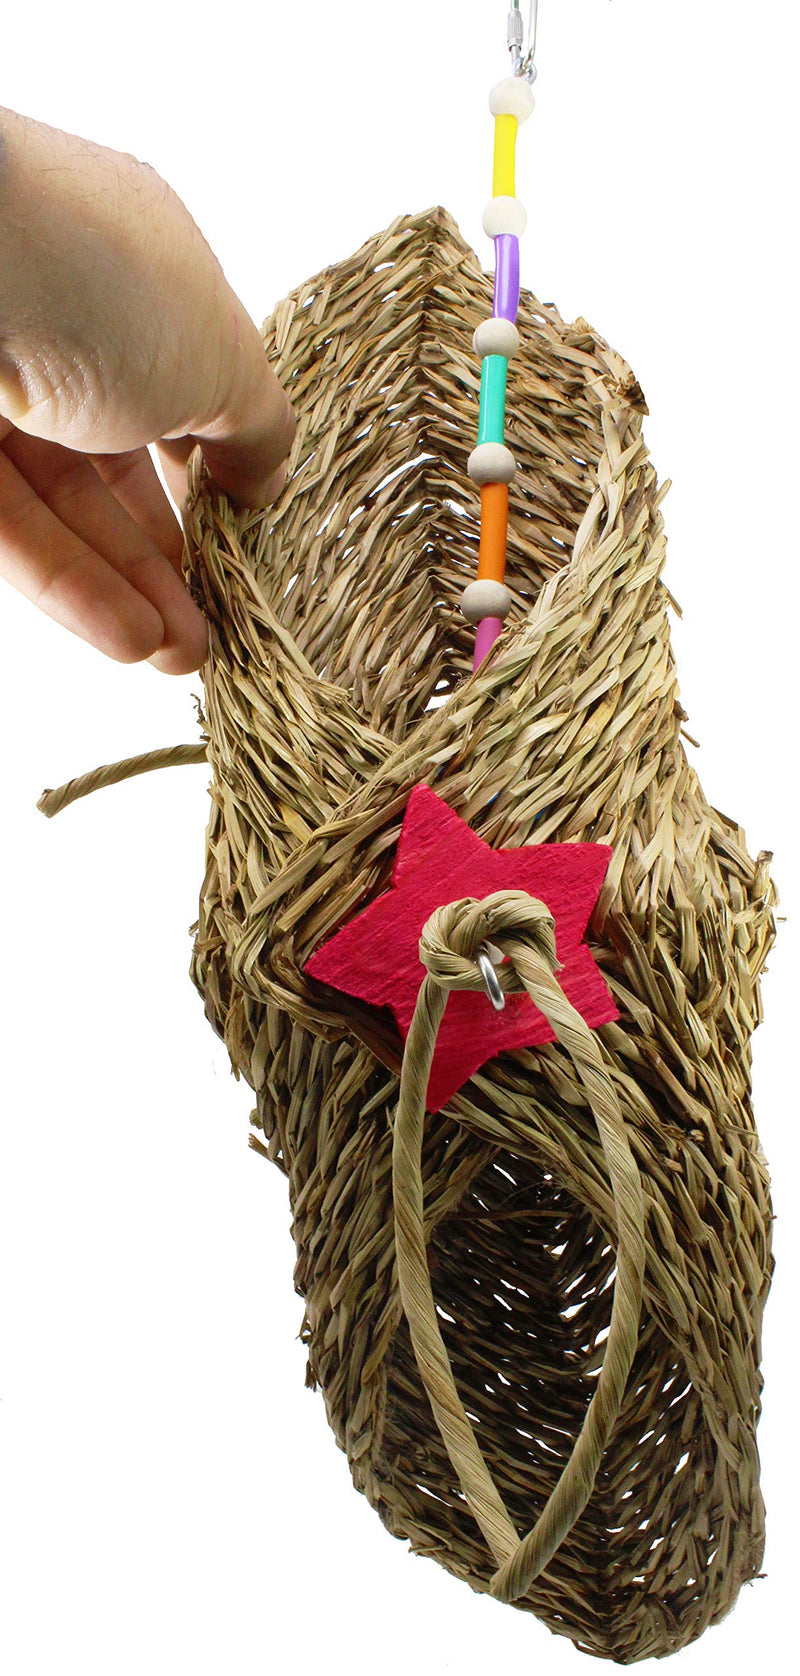 [Australia] - Bonka Bird Toys Foraging Jumbo Taco Bouquet Shredding Parrot Toy, Brightly Colored Natural Raffia and Palm Leaf. Quality Product Hand Made in The USA. Large Taco 